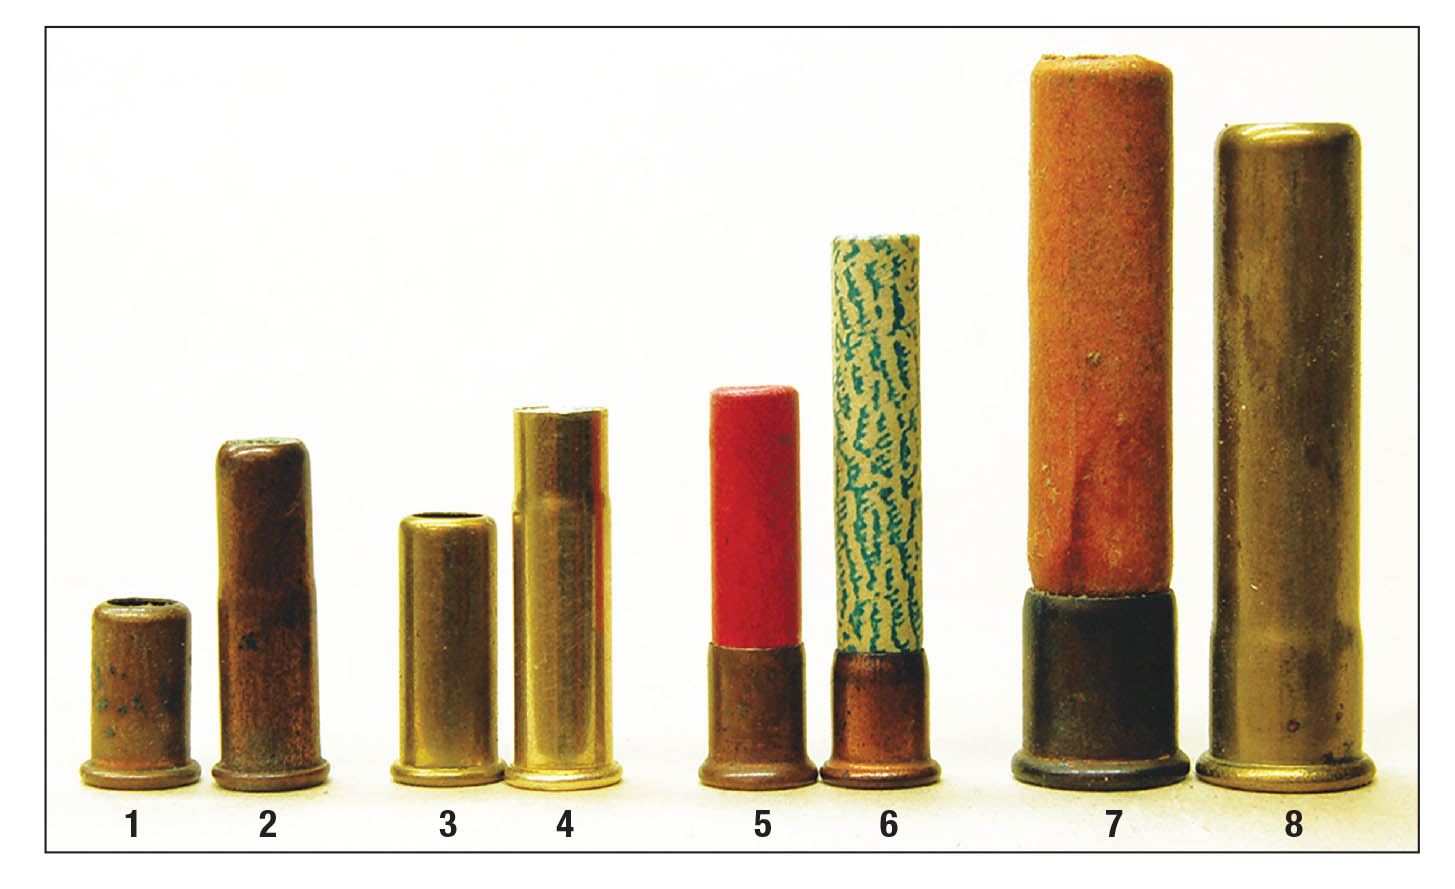 Early rimfire shot rounds include the: (1) .22 Short, (2) .22 Short extended case (note the slight bottleneck at .22 Short chamber mouth), (3 and 4) .22 Long or LR in standard and extended case, (5 and 6) 5mm Short and Long, (7 and 8) 9mm in a paper  and brass case.